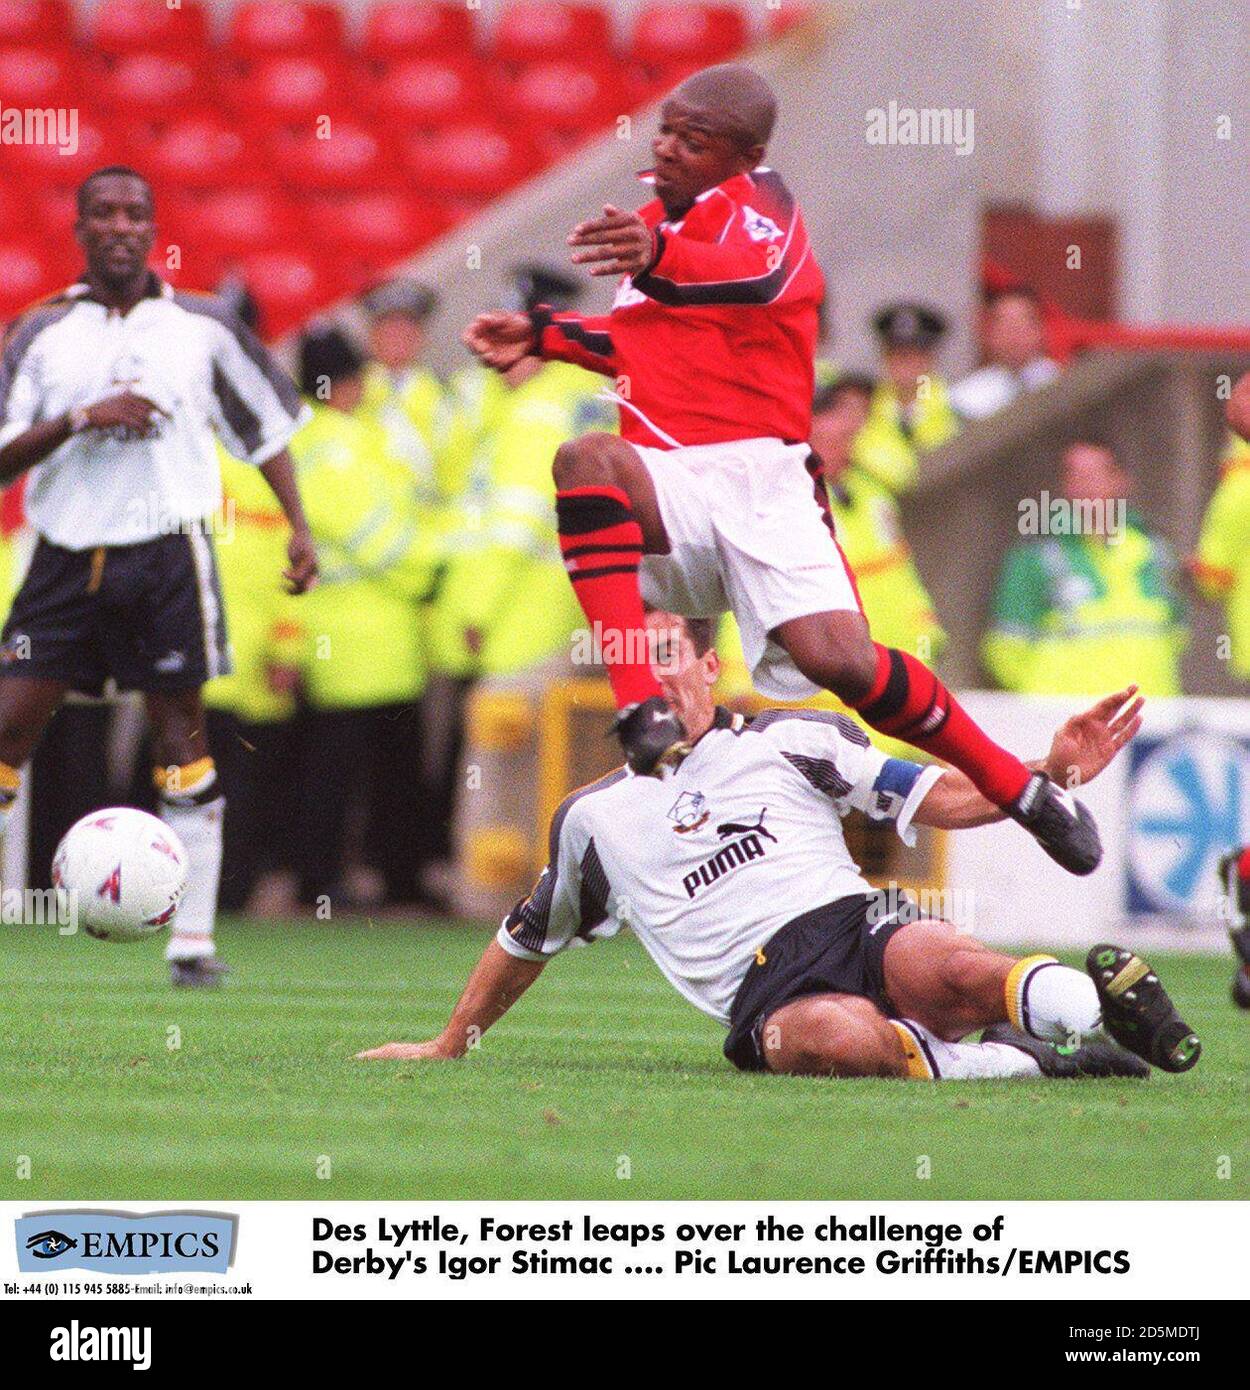 Des Lyttle, Forest leaps over the challenge of Derby's Igor Stimac Stock Photo